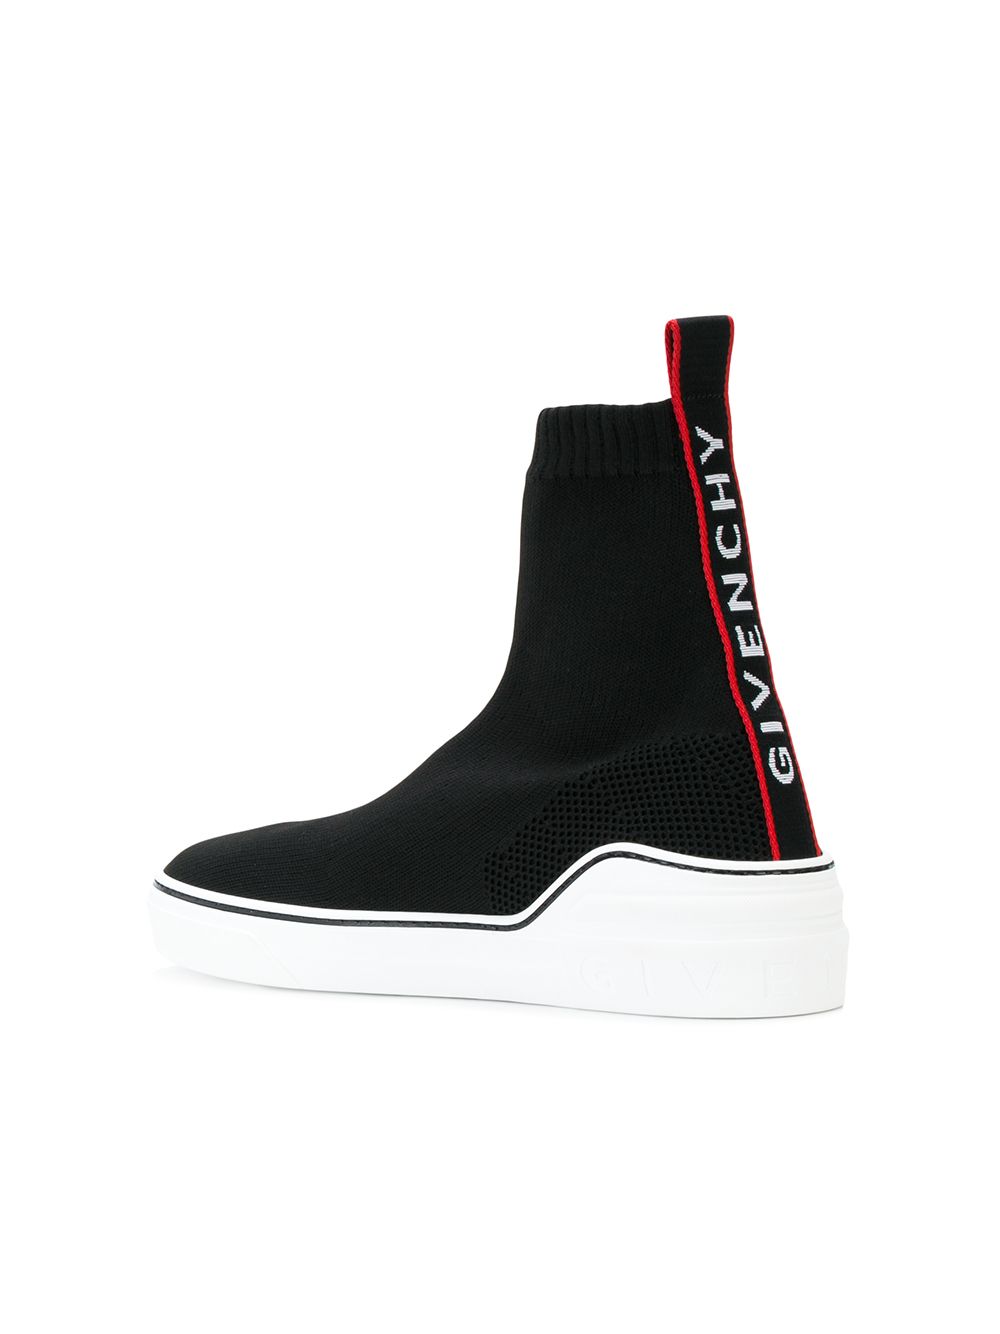 givenchy sock sneakers womens